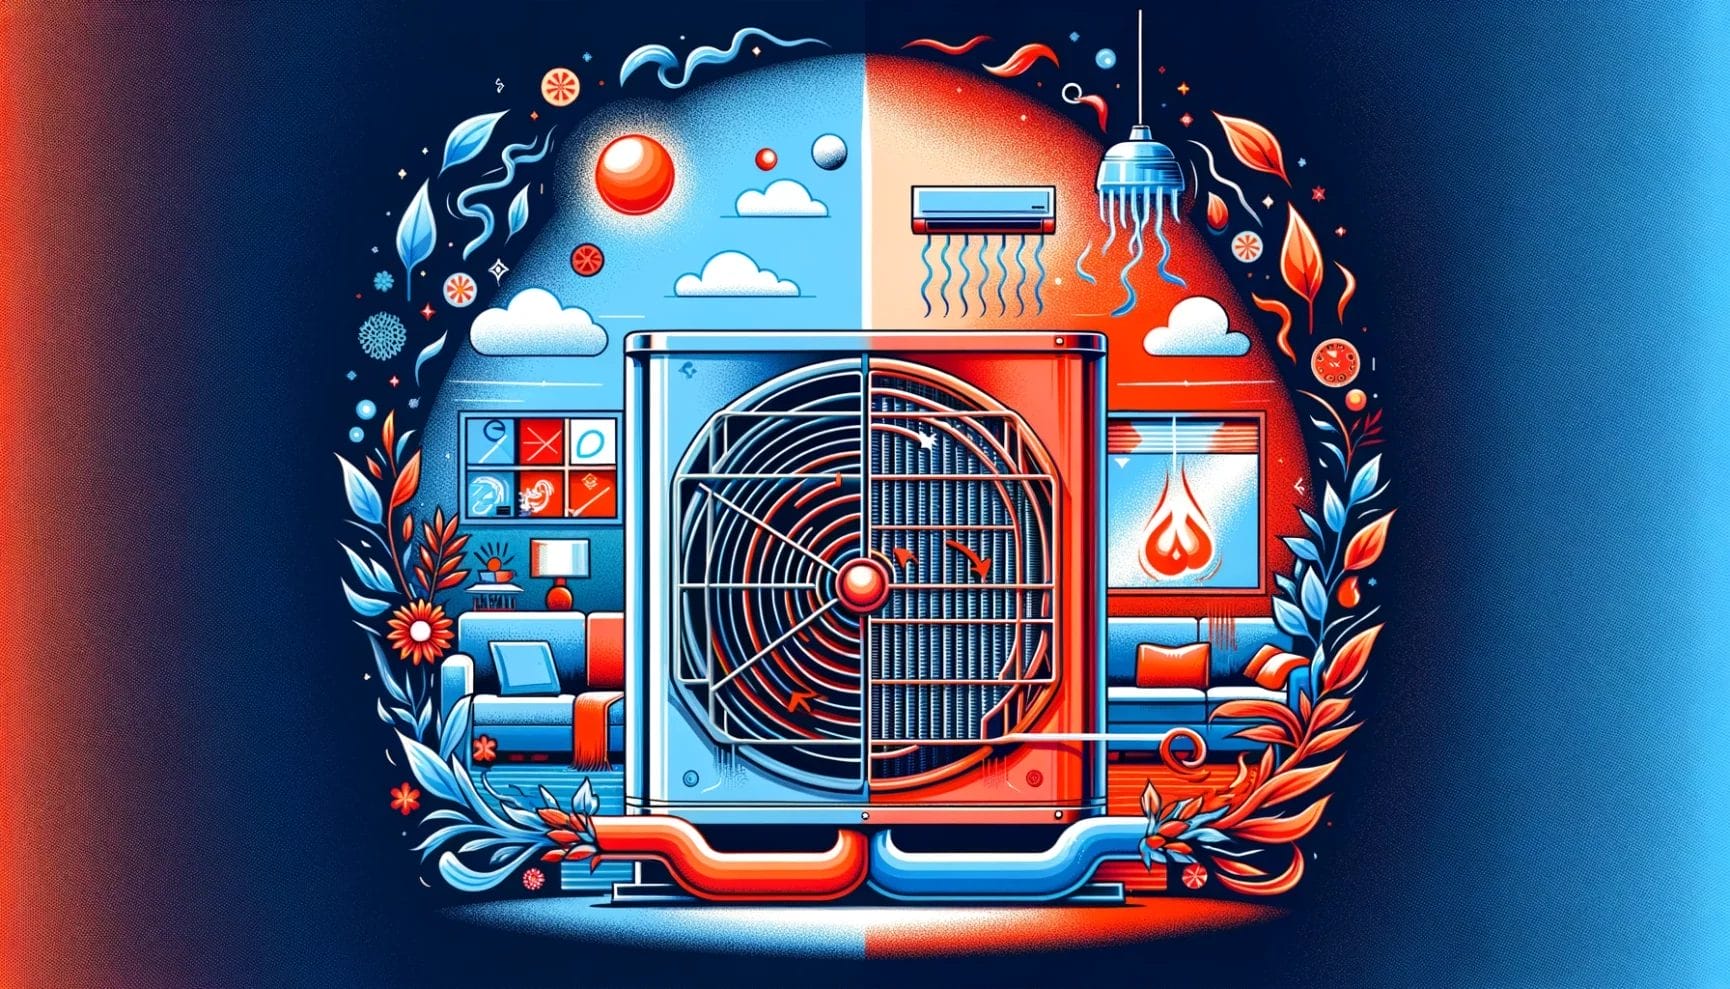 Illustration of an air conditioning unit with various elements representing comfort, temperature control, and environmental interaction.